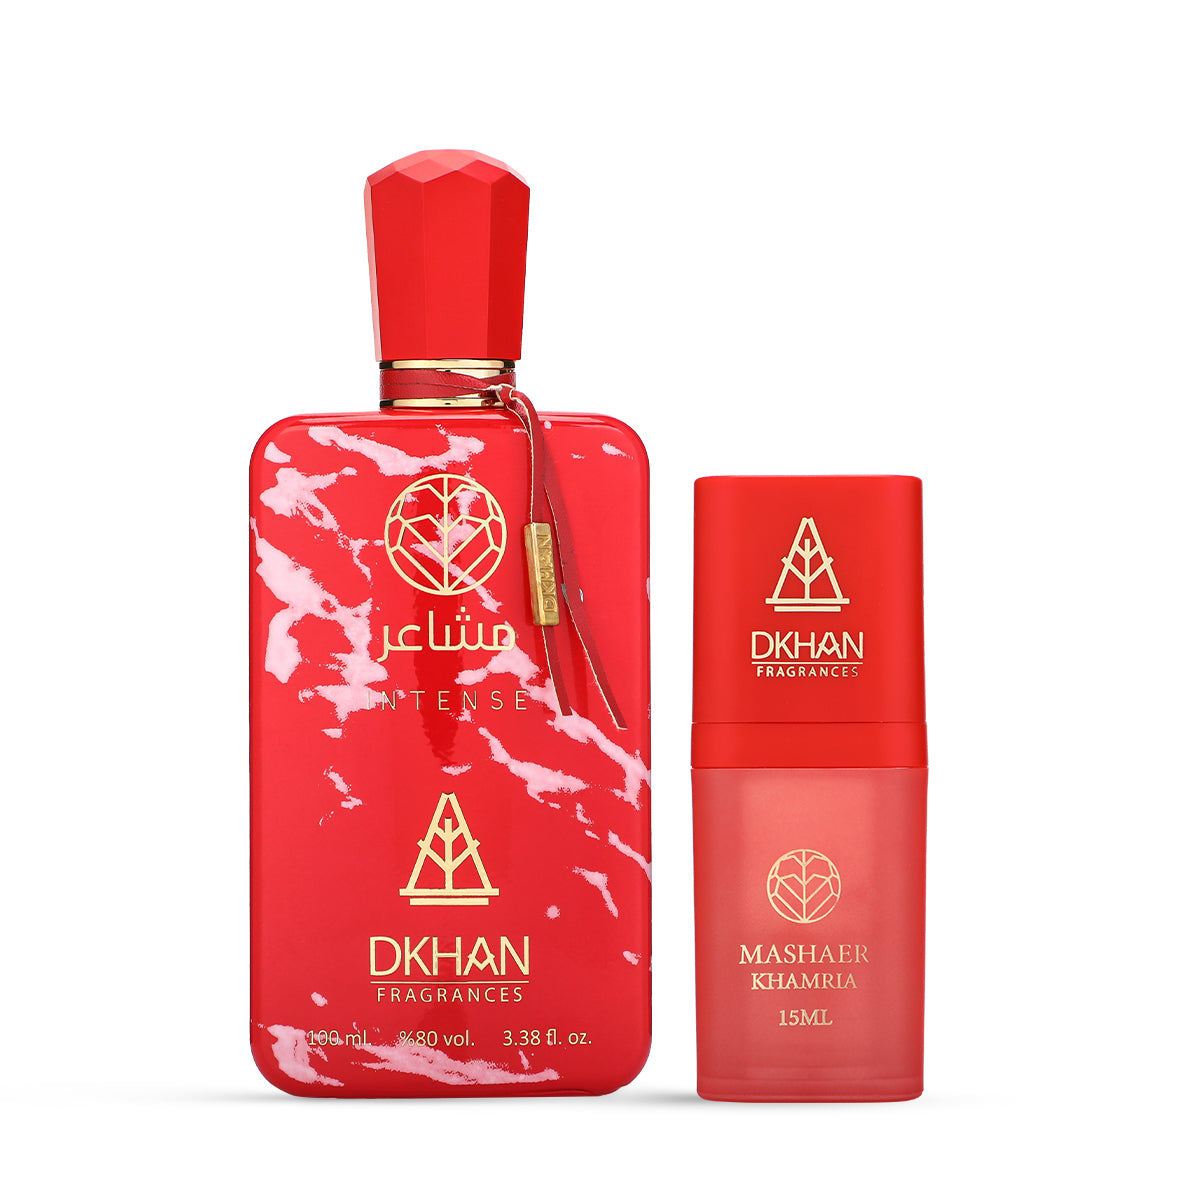 This image features a striking fragrance set from DKHAN Fragrances. On the left, there's a large red perfume bottle with a marbled white pattern, labeled "club INTENSE" and displaying the DKHAN Fragrances logo, along with the quantity "100 ml, 3.38 fl. oz., 80% vol." The bottle has a rectangular shape with rounded edges and a geometric red cap, complemented by a gold tag. To the right is a smaller, cylindrical red bottle with a smooth finish, labeled "MASHAER KHAMRIA" and the volume "15ML".